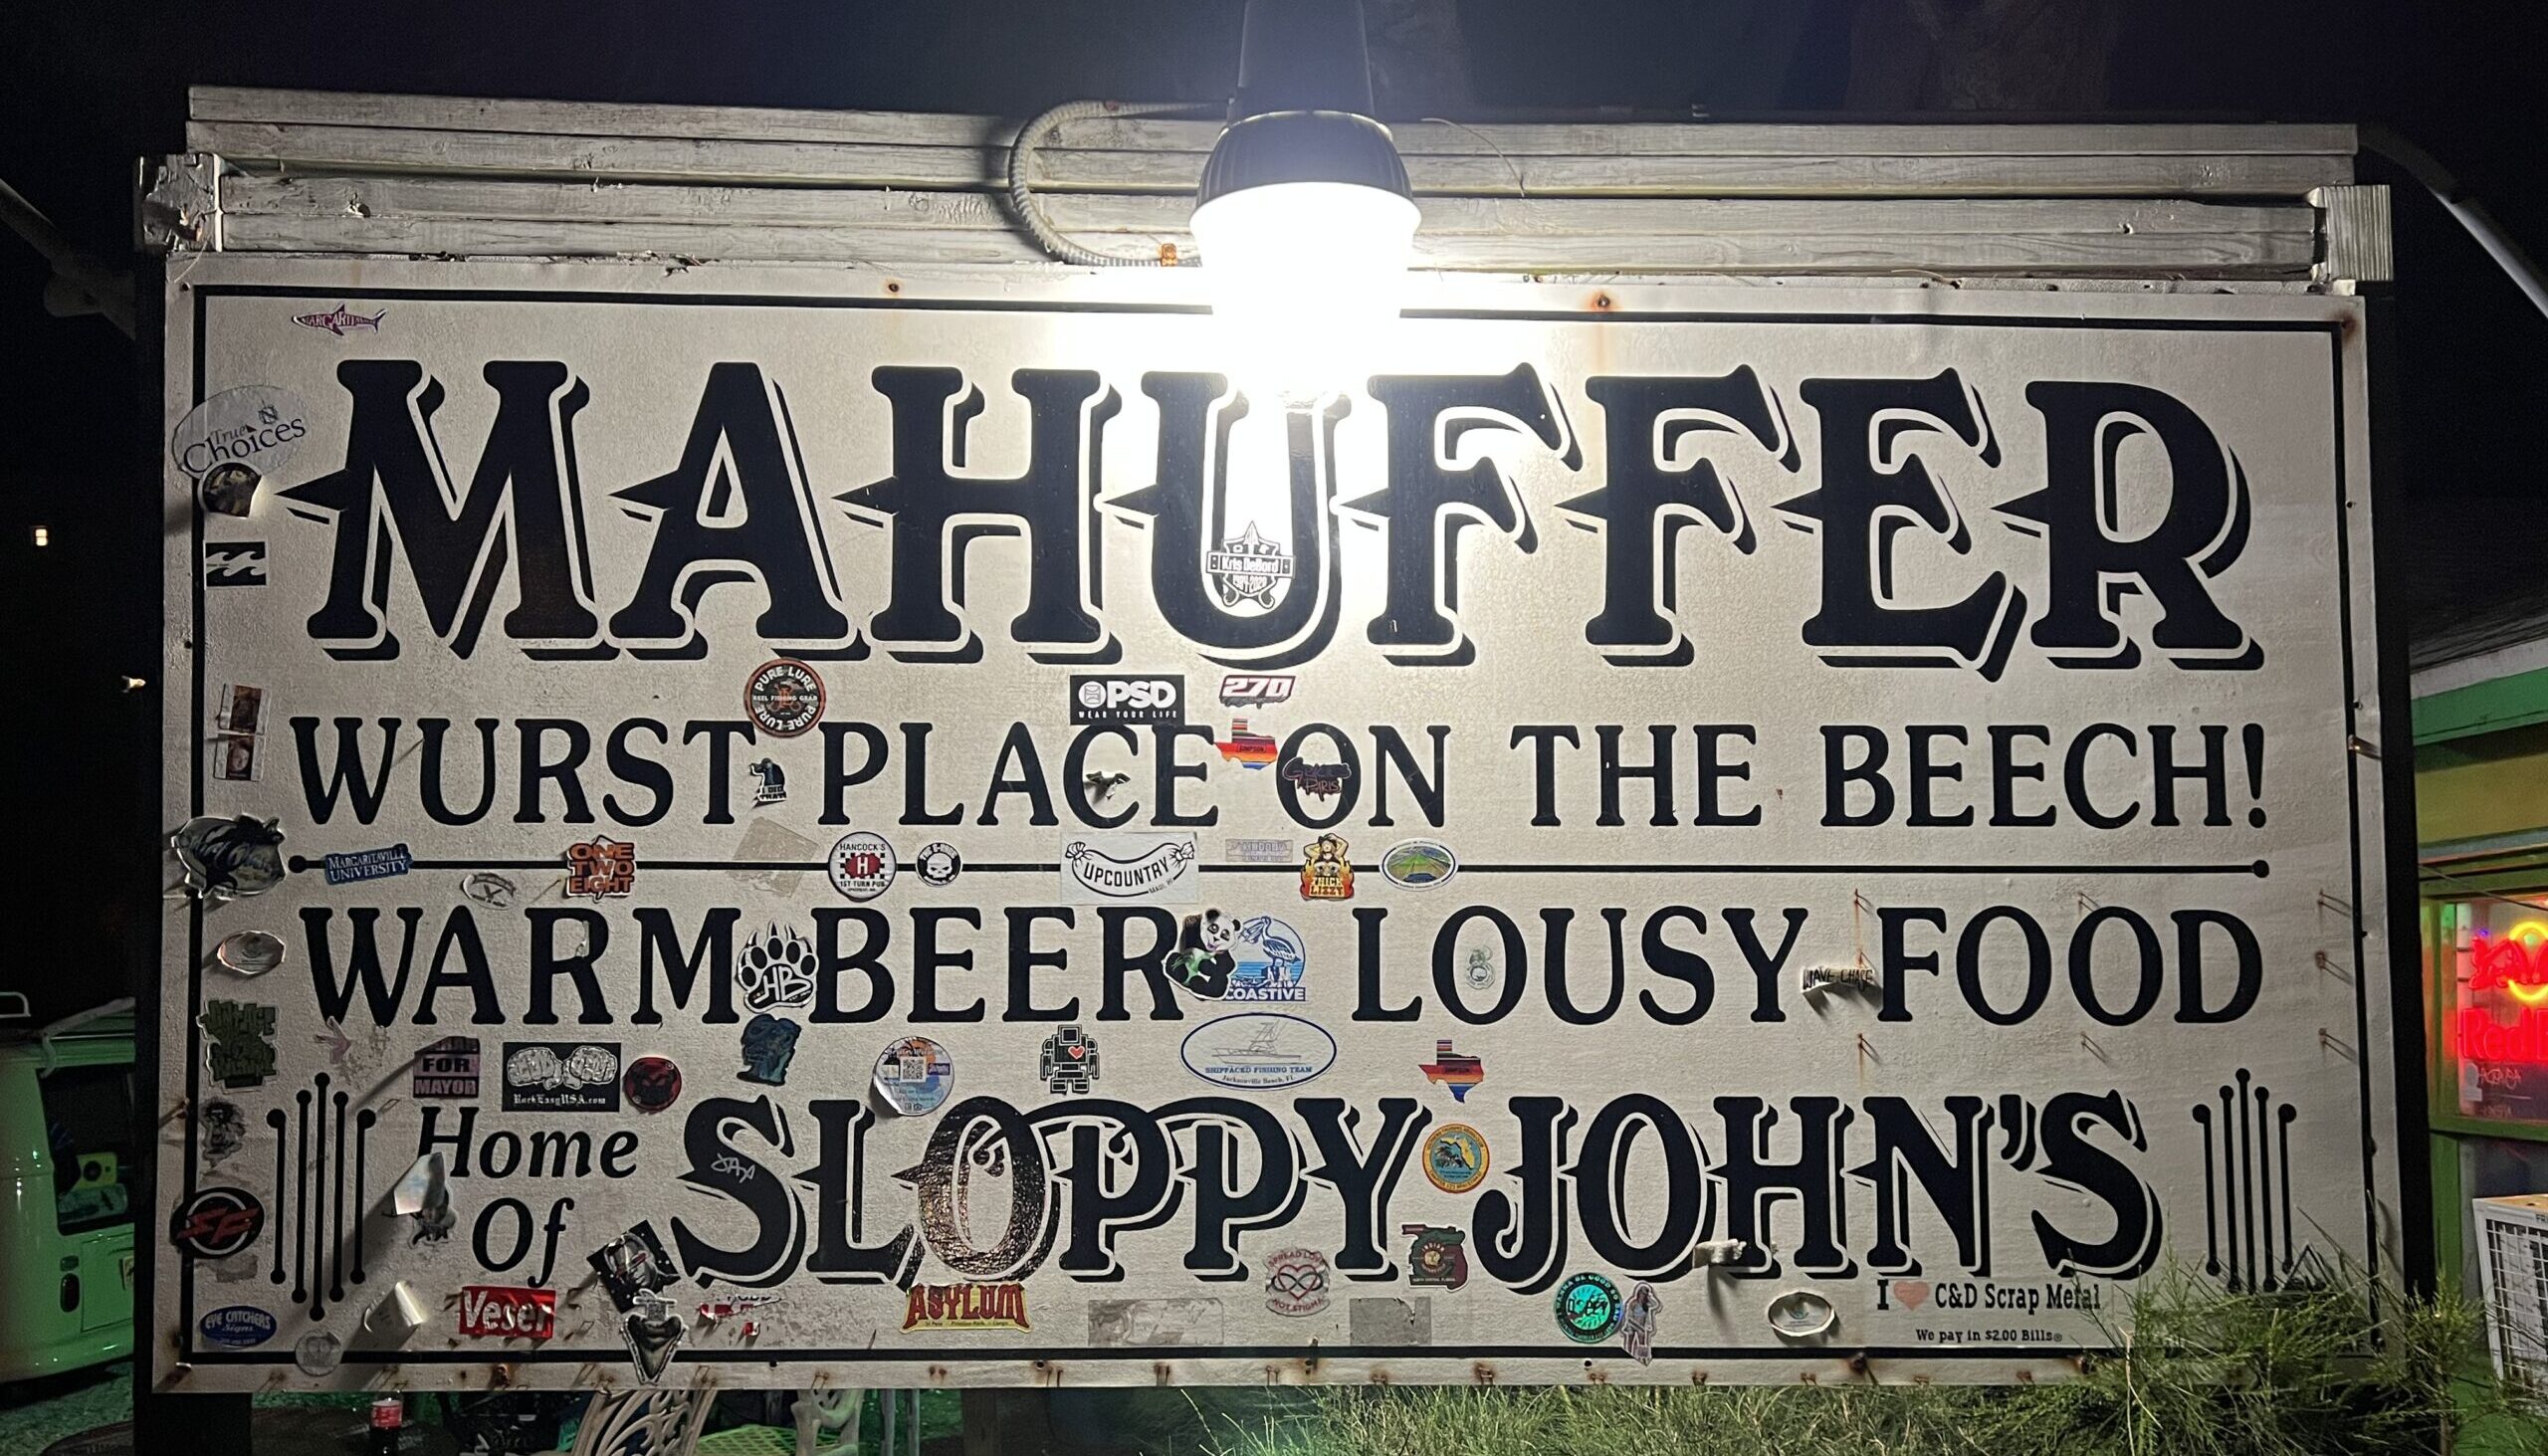 Sign saying "Mahuffer wurst place on the beech! Warm beer, lousy food. Home of Sloppy John"